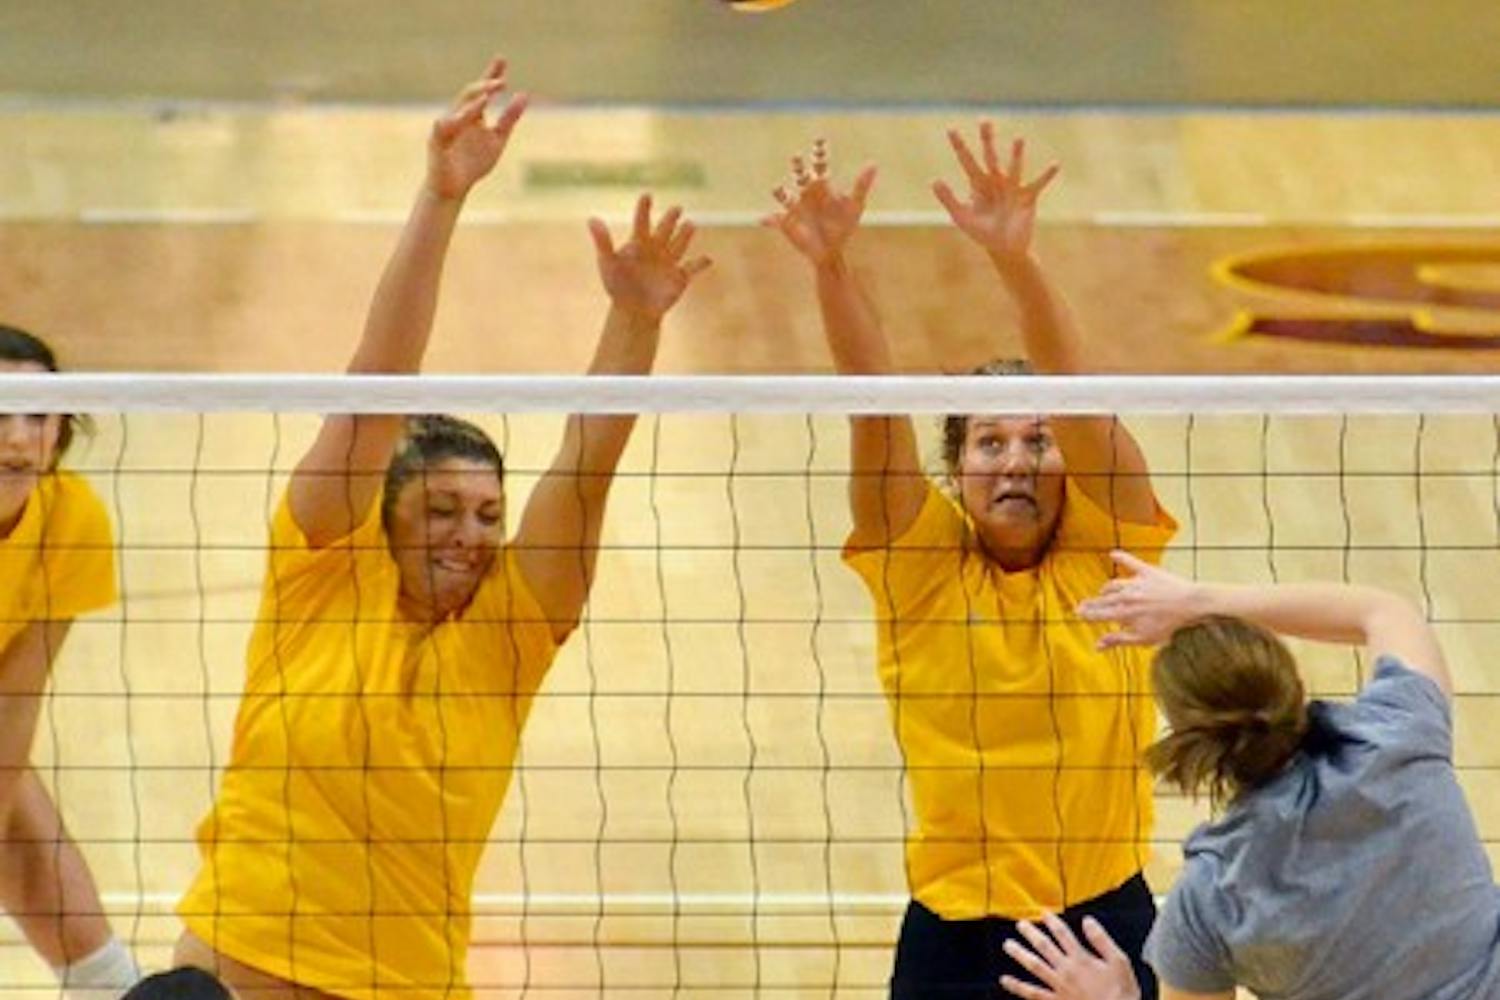 BUILDING BLOCKS: ASU senior middle blocker Sonja Markanovich and redshirt sophomore outside hitter Ashley Kastl raise up to block a shot in the Alumnae Match last August. The team centers on their unofficial motto, “One and Done,” to encourage themselves during games. (Photo by Aaron Lavinsky)